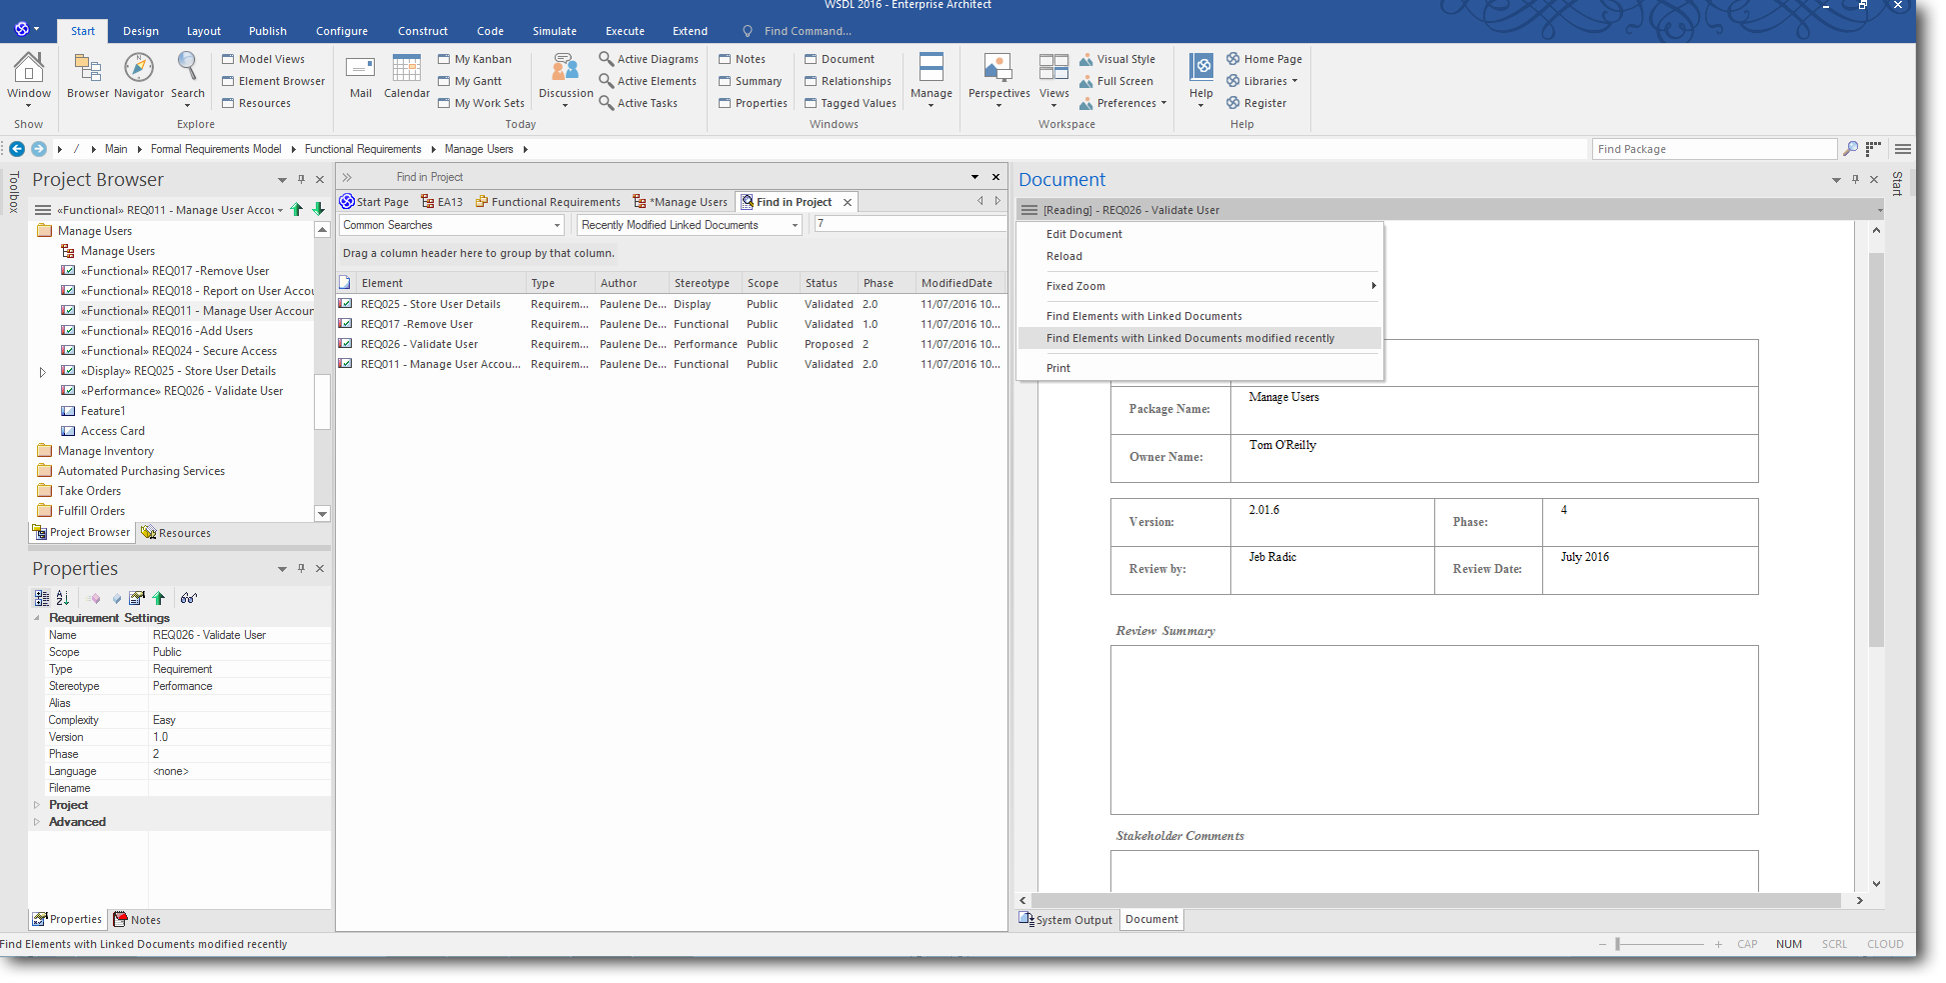 Enterprise Architect 13: Dynamic Documents - Find Elements with Linked Documents modified recently